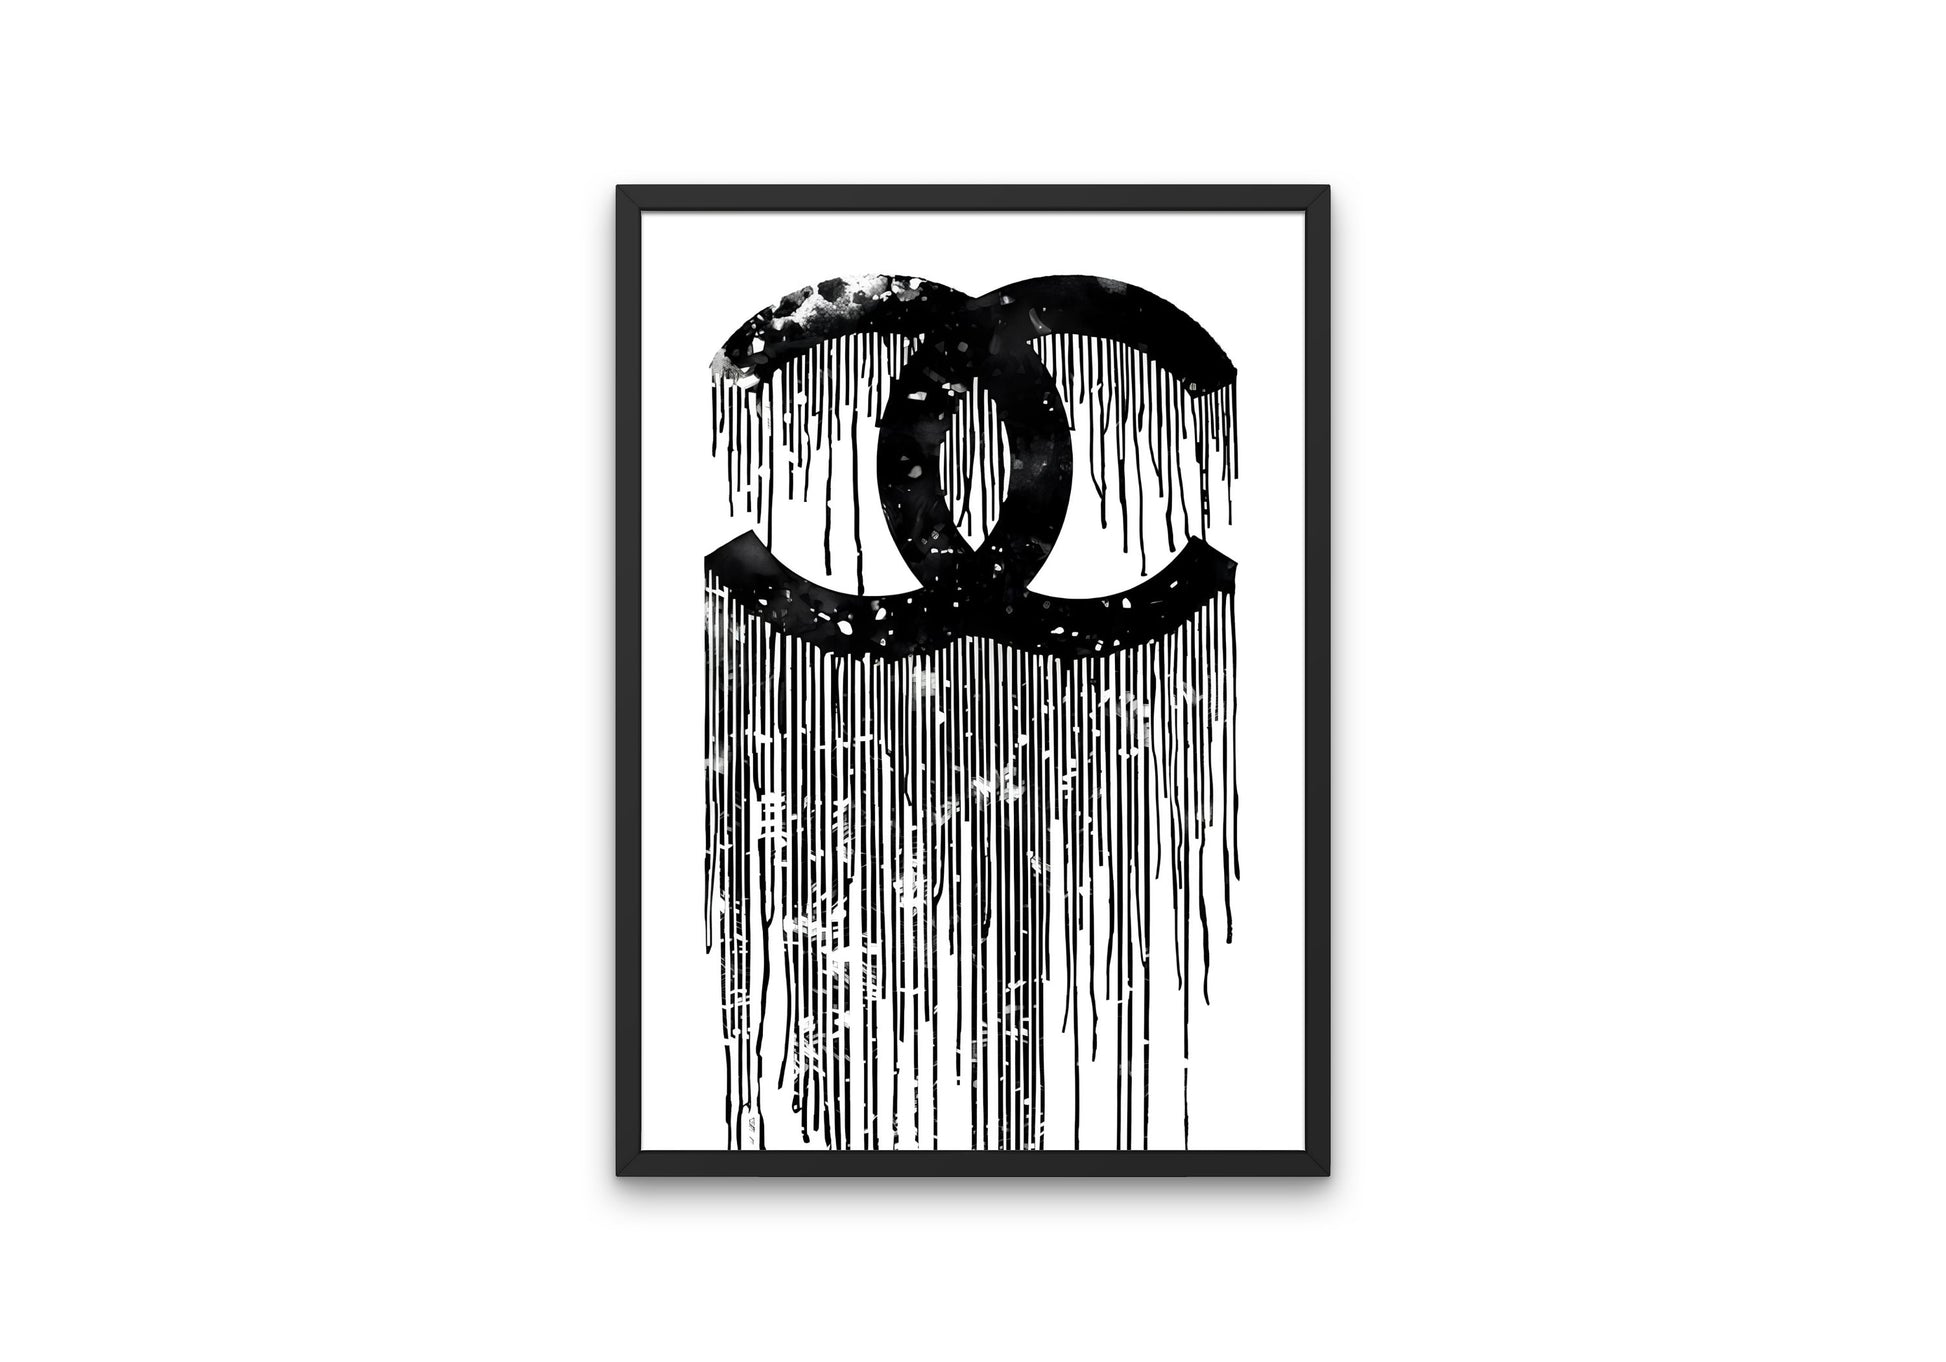 Black and White Designer Drip Wall Art DIGITAL PRINT, Luxury Fashion Print black & white, Glam poster, over the bed art, Abstract Hypebeast